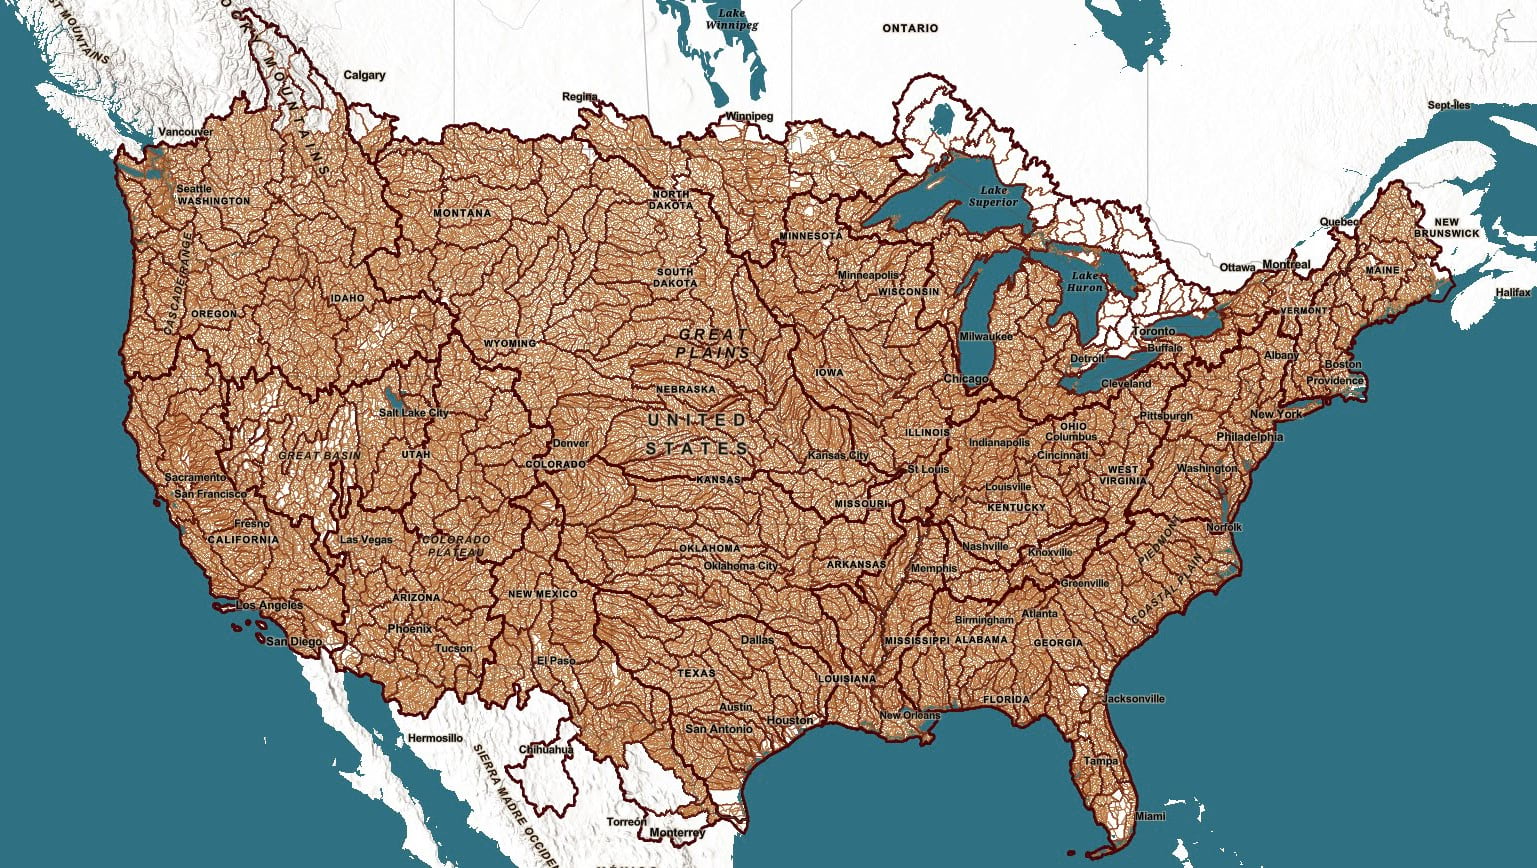 The Watershed Boundary Dataset, now serving in the Living Atlas of the World